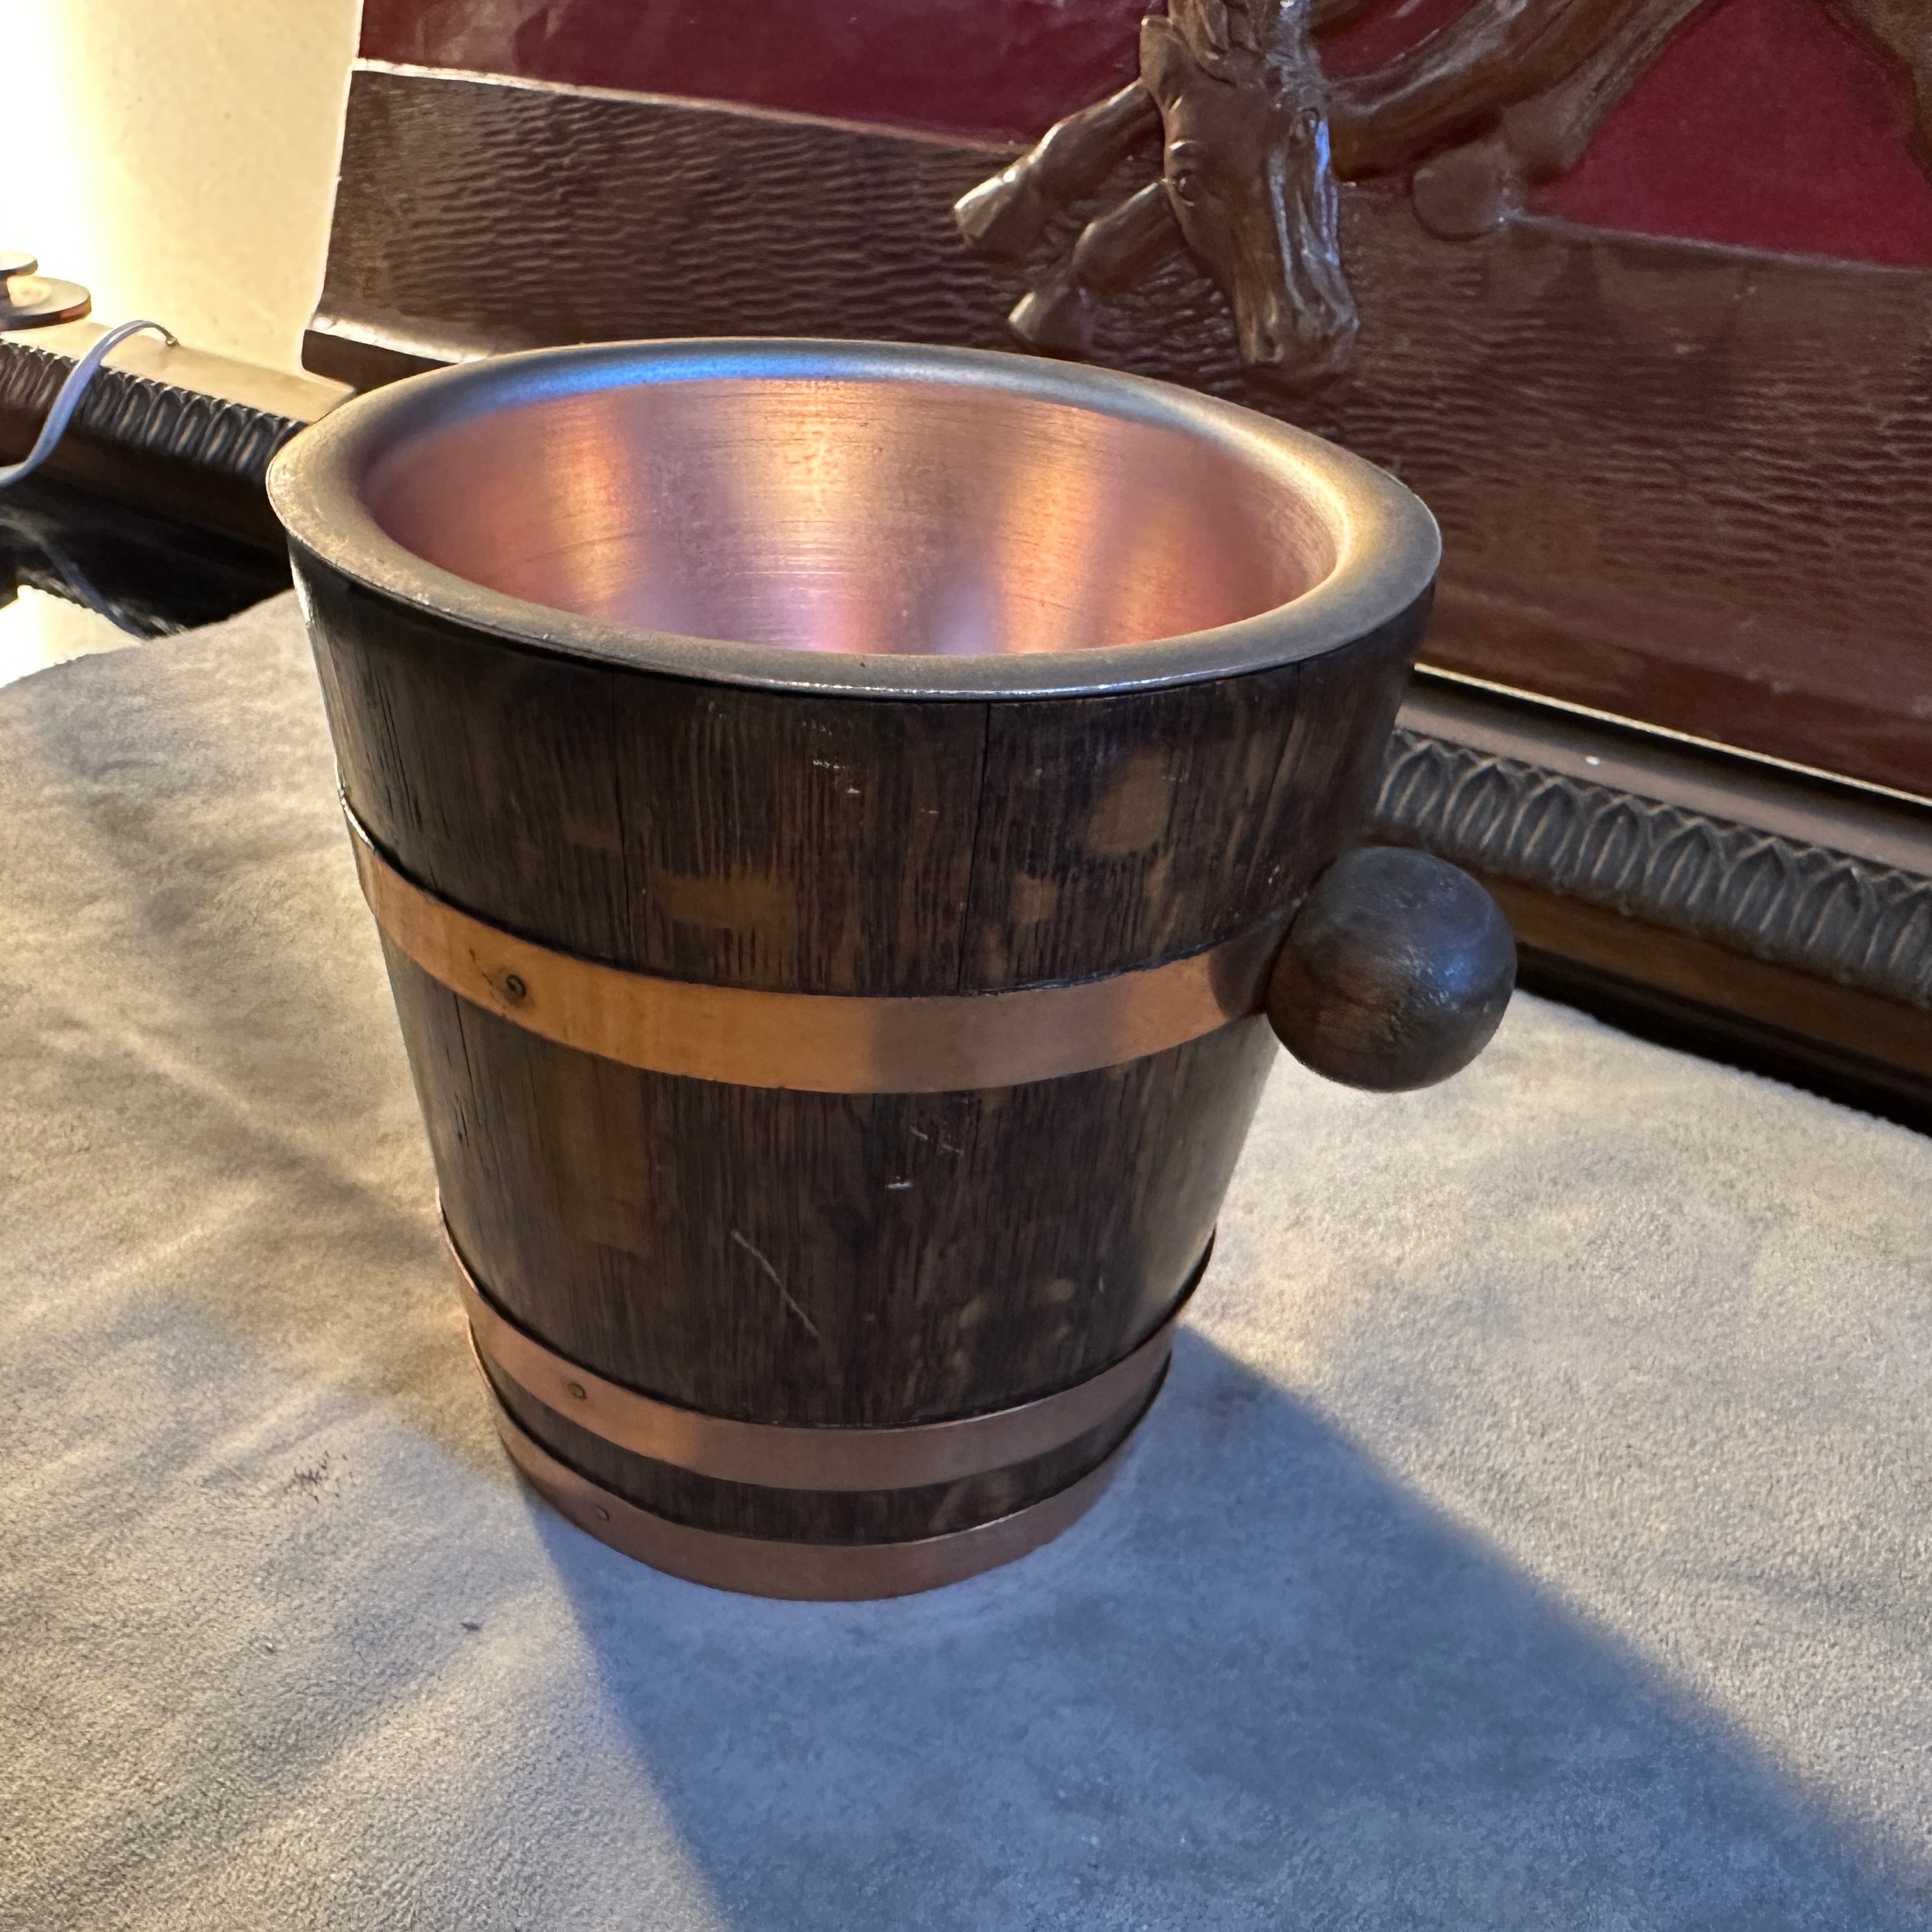 A superb oak and copper ice bucket designed and manufactured in France in the Fifties in the style of Geraud Lafitte. It's in original condition and patina, probably it hasn'' been never used. The ice bucket exhibits characteristics of Mid-century